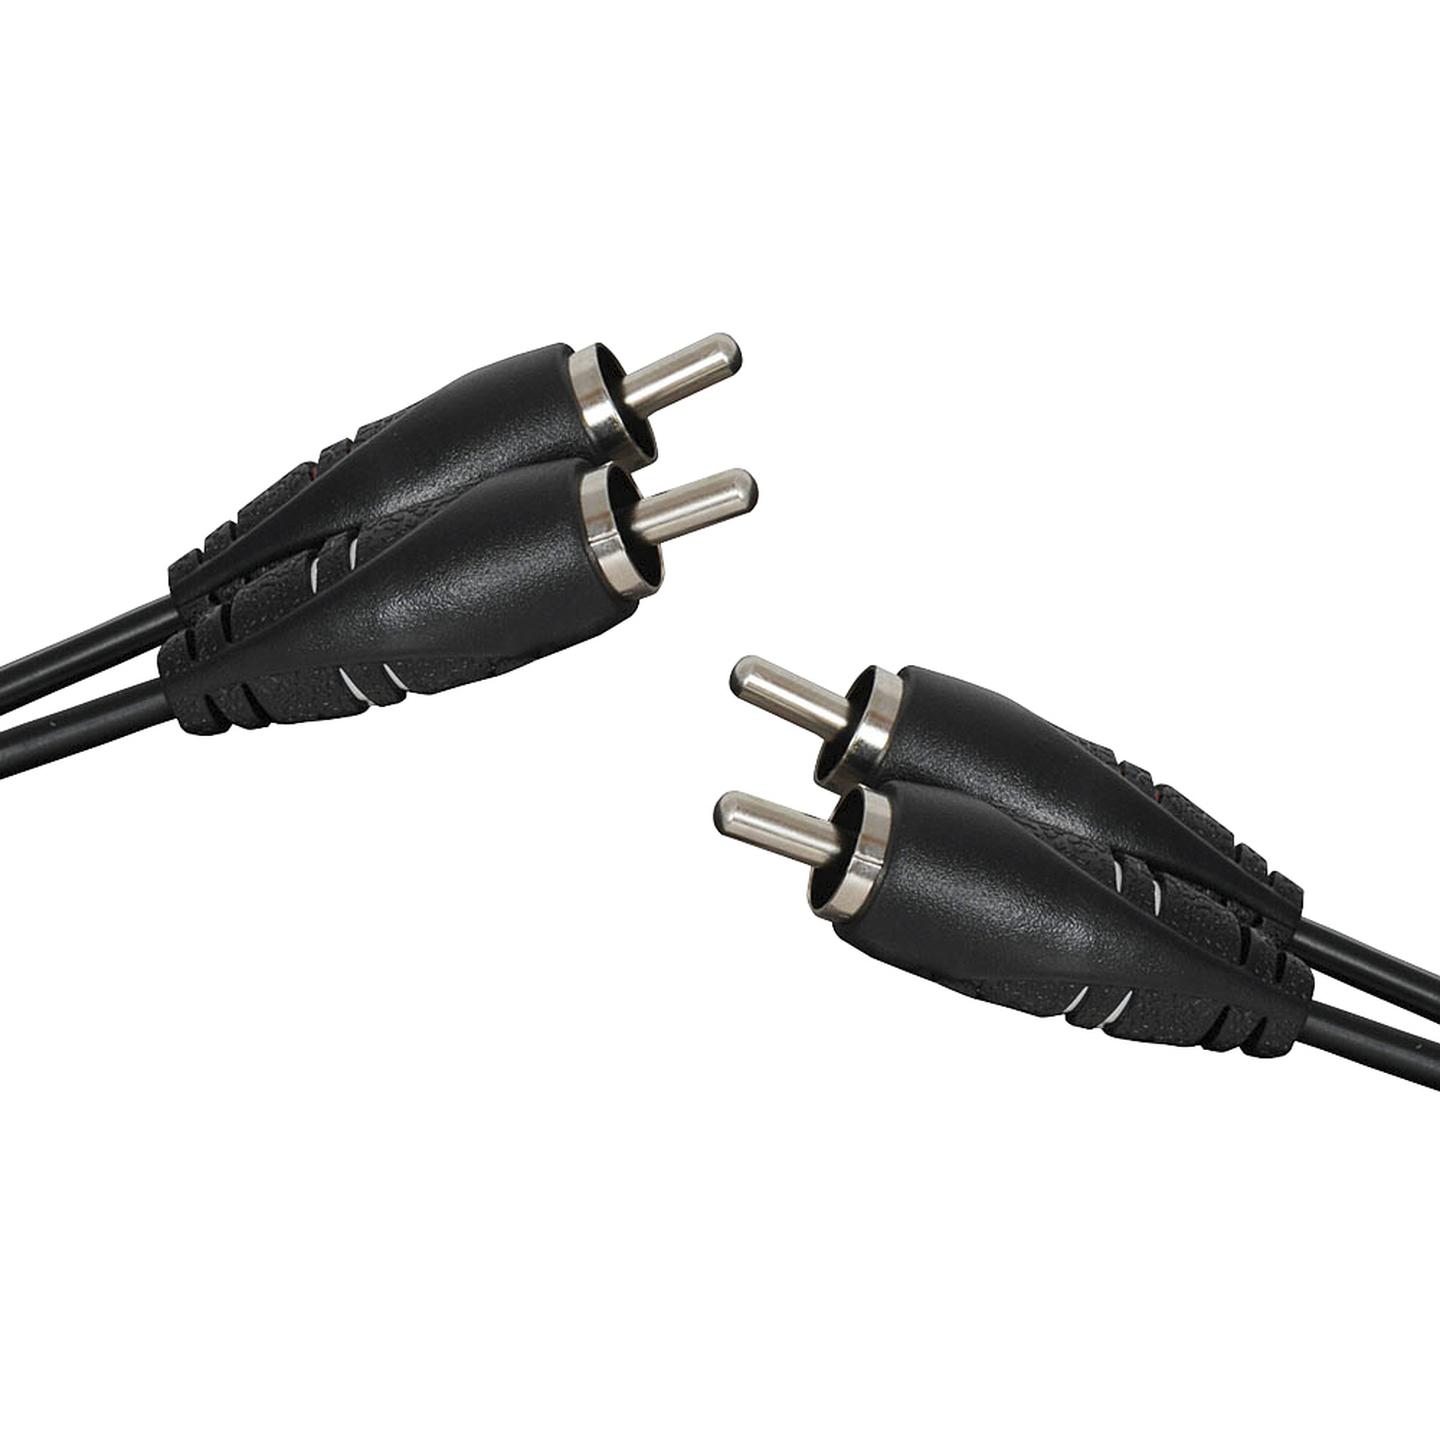 2 x RCA Plugs to 2 x RCA Plugs Audio Cable - 10m